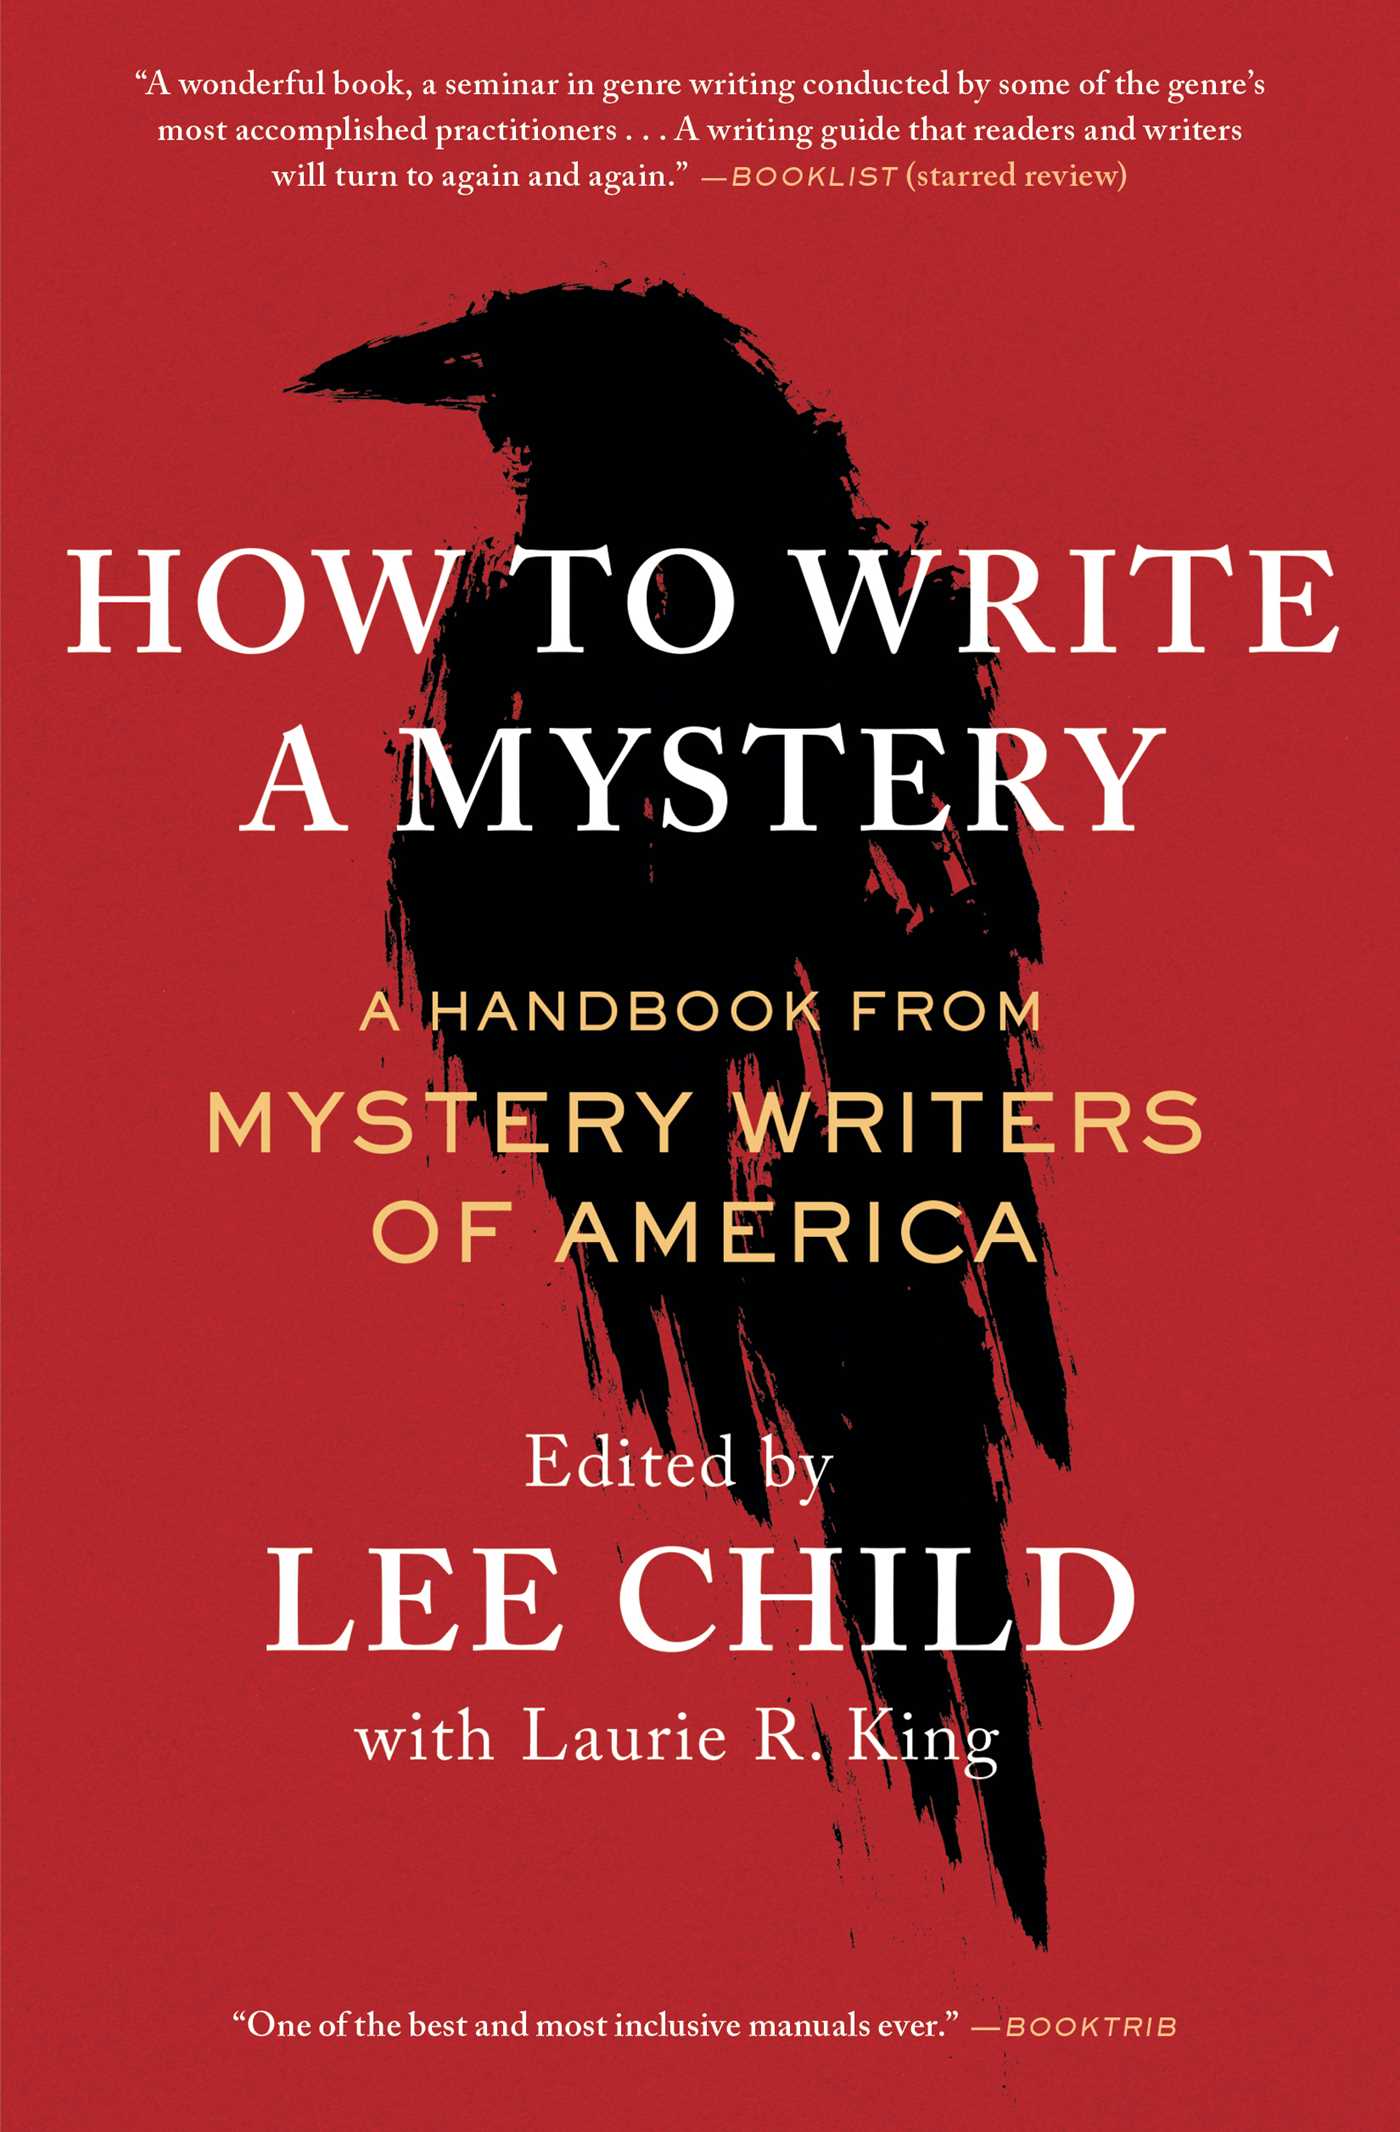 How to write a mystery : a handbook from Mystery Writers of America